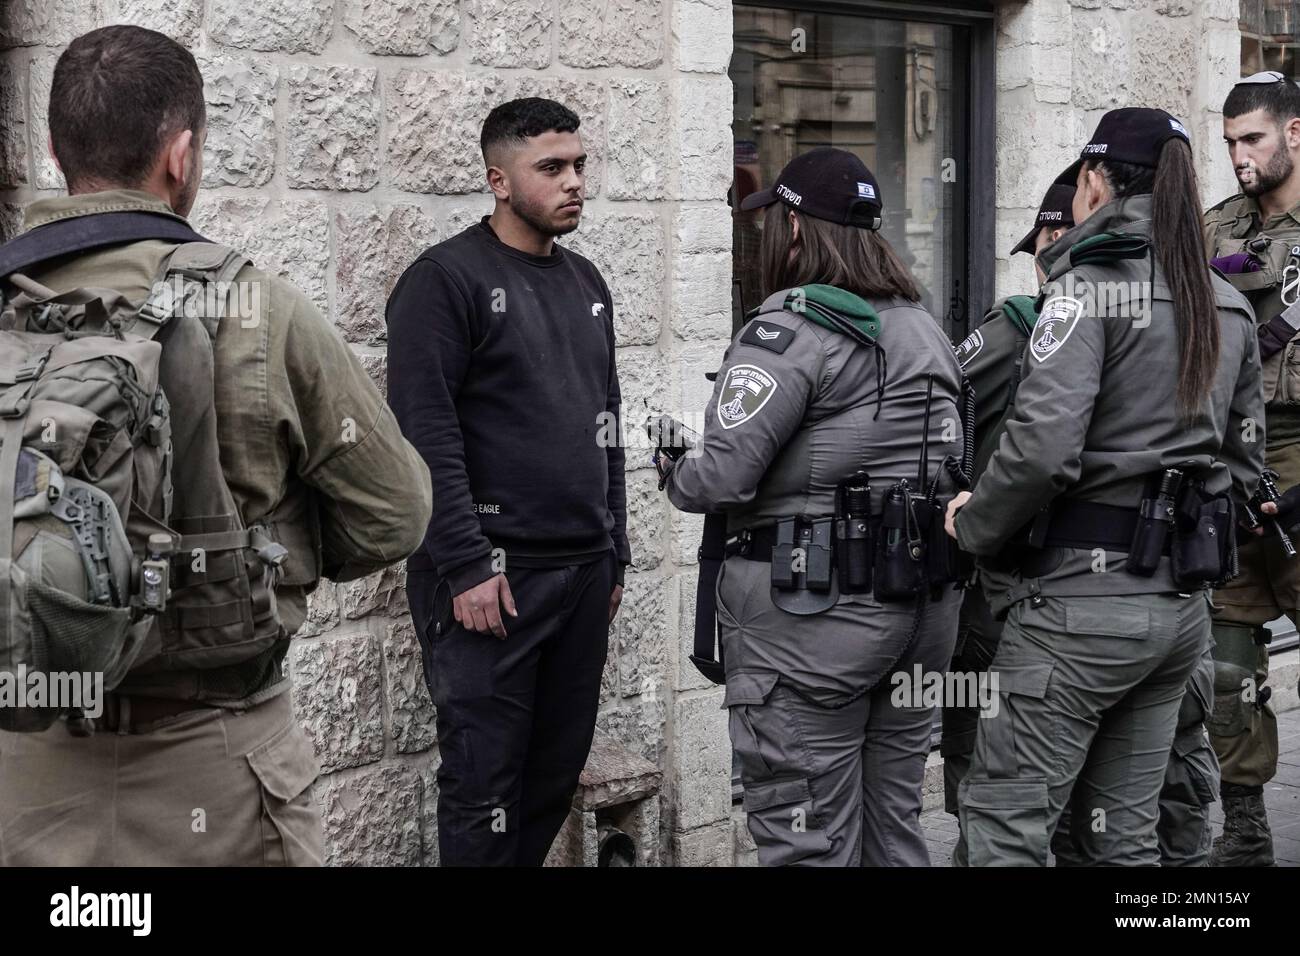 Jerusalem, Israel. 30th Jan, 2023. Border Police forces with reinforcements from the IDF Givati Brigade in purple berets, on heightened security, detain and question a young Palestinian man wearing a black sweatshirt with an image of a revolver. Israel raised the terror alert to the highest level and deployed additional battalions to Jerusalem and the West Bank amid an escalation of violence following two terrorist shootings in the capital. Seven Israelis have been murdered and five injured. Credit: Nir Alon/Alamy Live News Stock Photo